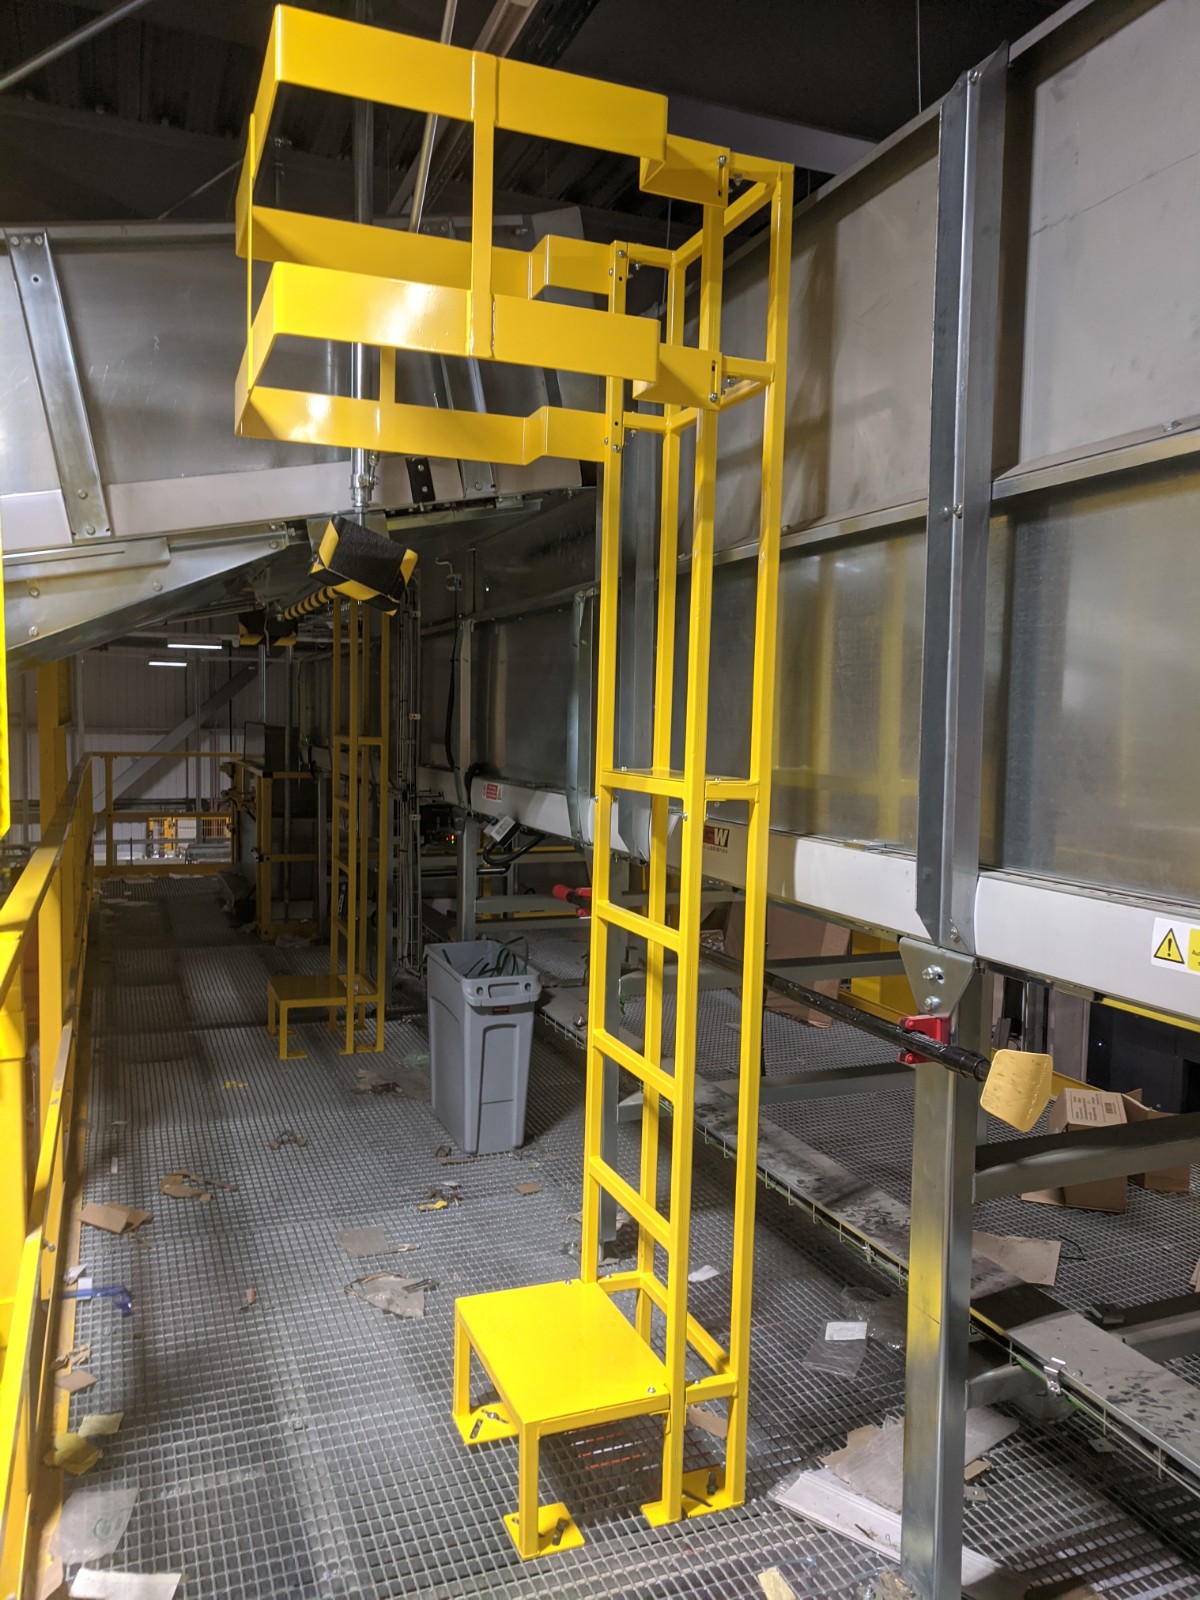 Conveyor Access Ladders and Barrier Extensions